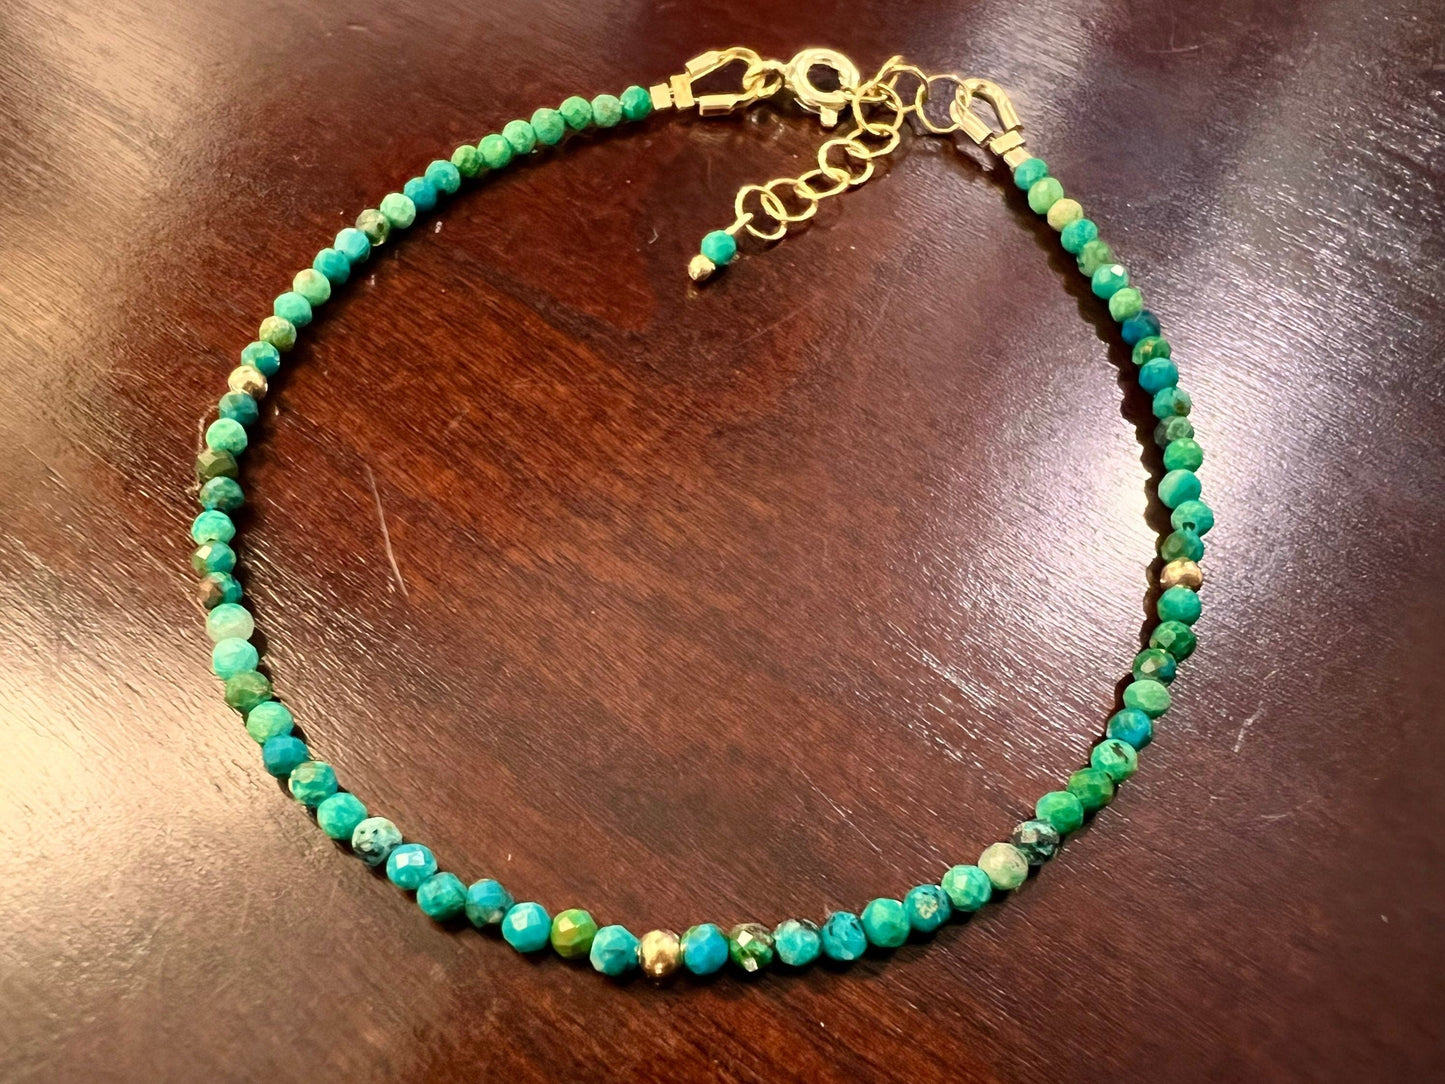 Natural Chrysocolla 2mm micro faceted 14k Gold filled Bracelet with 1” extensions,Precious Gemstones gift .